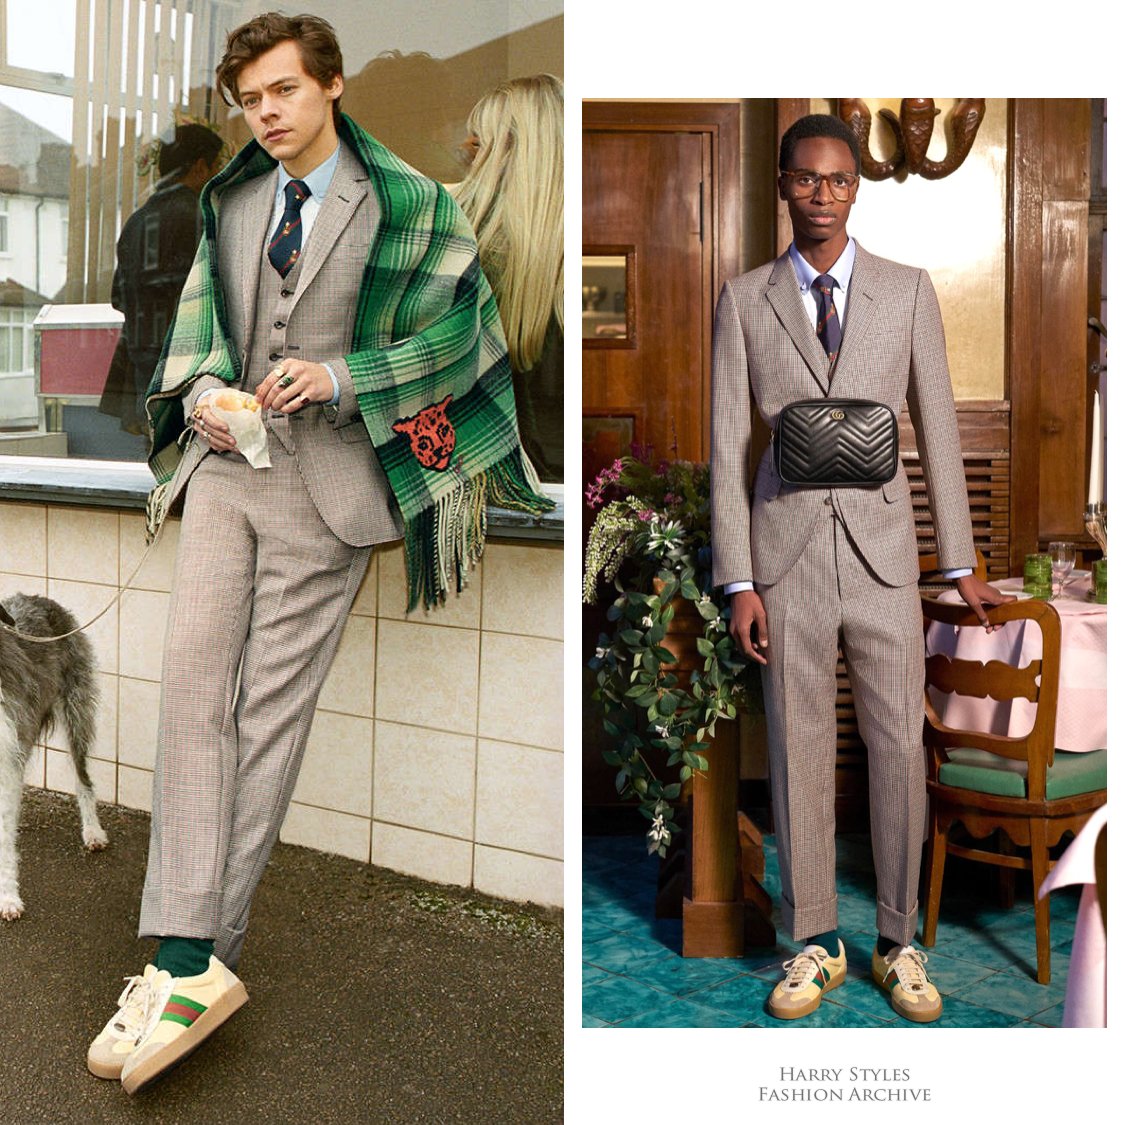 Twitter 上的Harry Styles Fashion Archive："Harry Styles for #GucciTailoring -  Harry wore Look 67 from the @gucci Pre-Fall 2018 collection. More here:  https://t.co/BYy3tPoGHY https://t.co/NItwMX0TQE" / Twitter